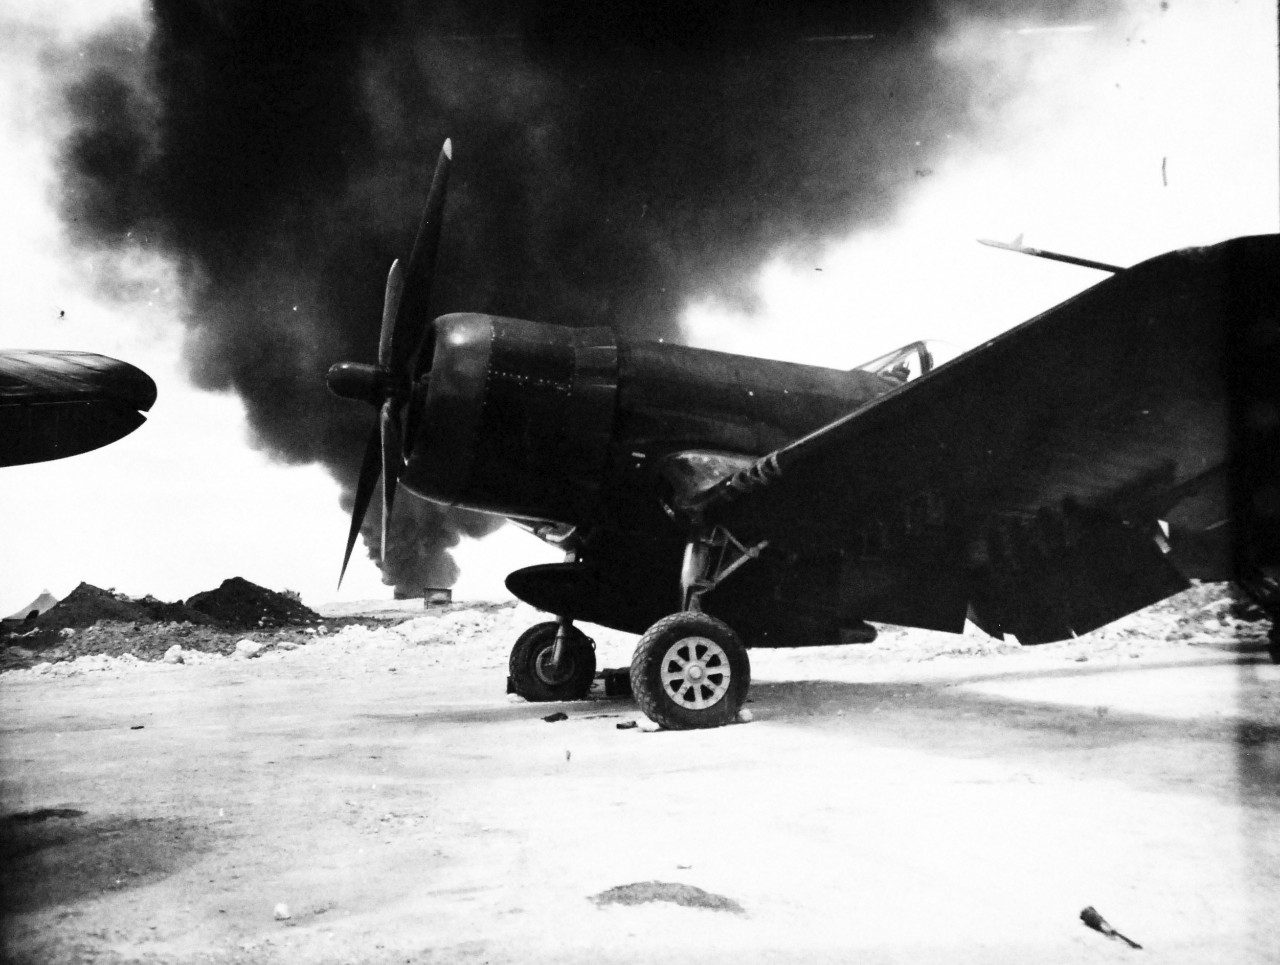 127-GW-524-125708:  Okinawa Campaign, April-June 1945.   Against a background of heavy smoke which belched from a fuel dump fire on Okinawa, the new F4U-4 “Corsair” fighter stands in its revetment.   Photographed by Corporal W.C. Beall, 19 June 1945.  Official U.S. Navy Photograph, now in the collections of the National Archives.   (2014/6/25). 